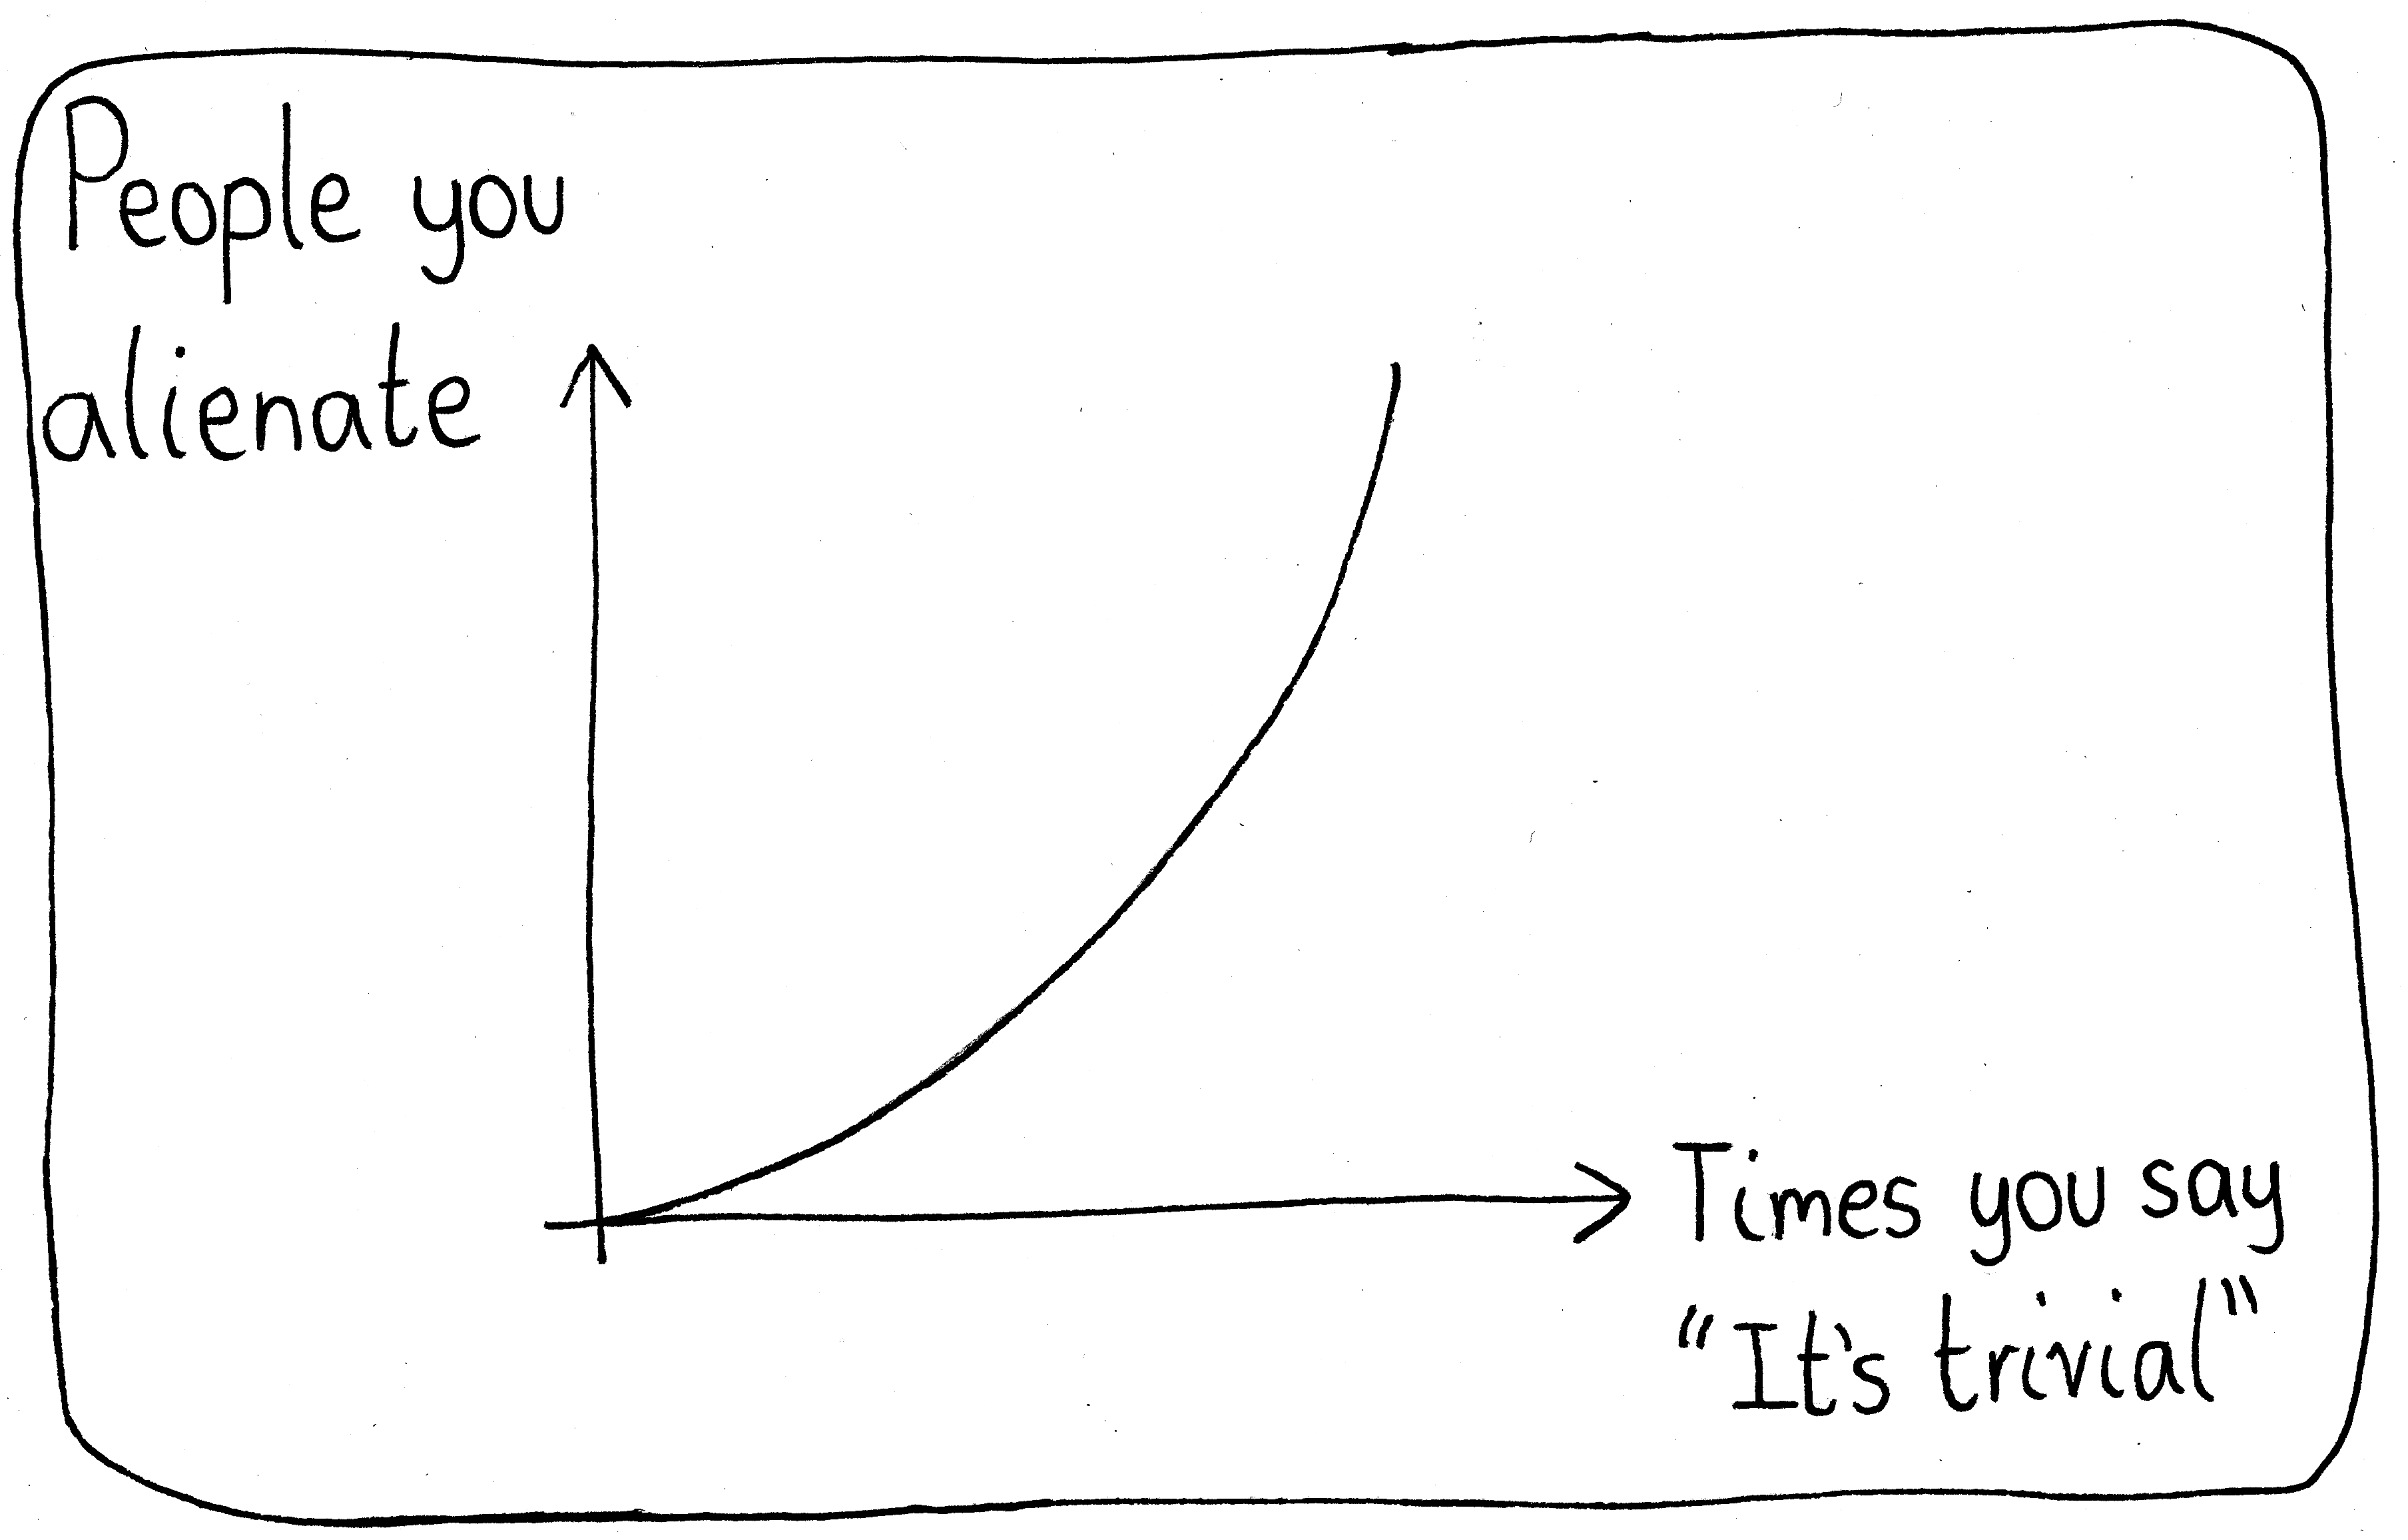 A plot of "People you alienate" versus "Times you say, 'It's trivial'". It curves upwards in an exponential way.